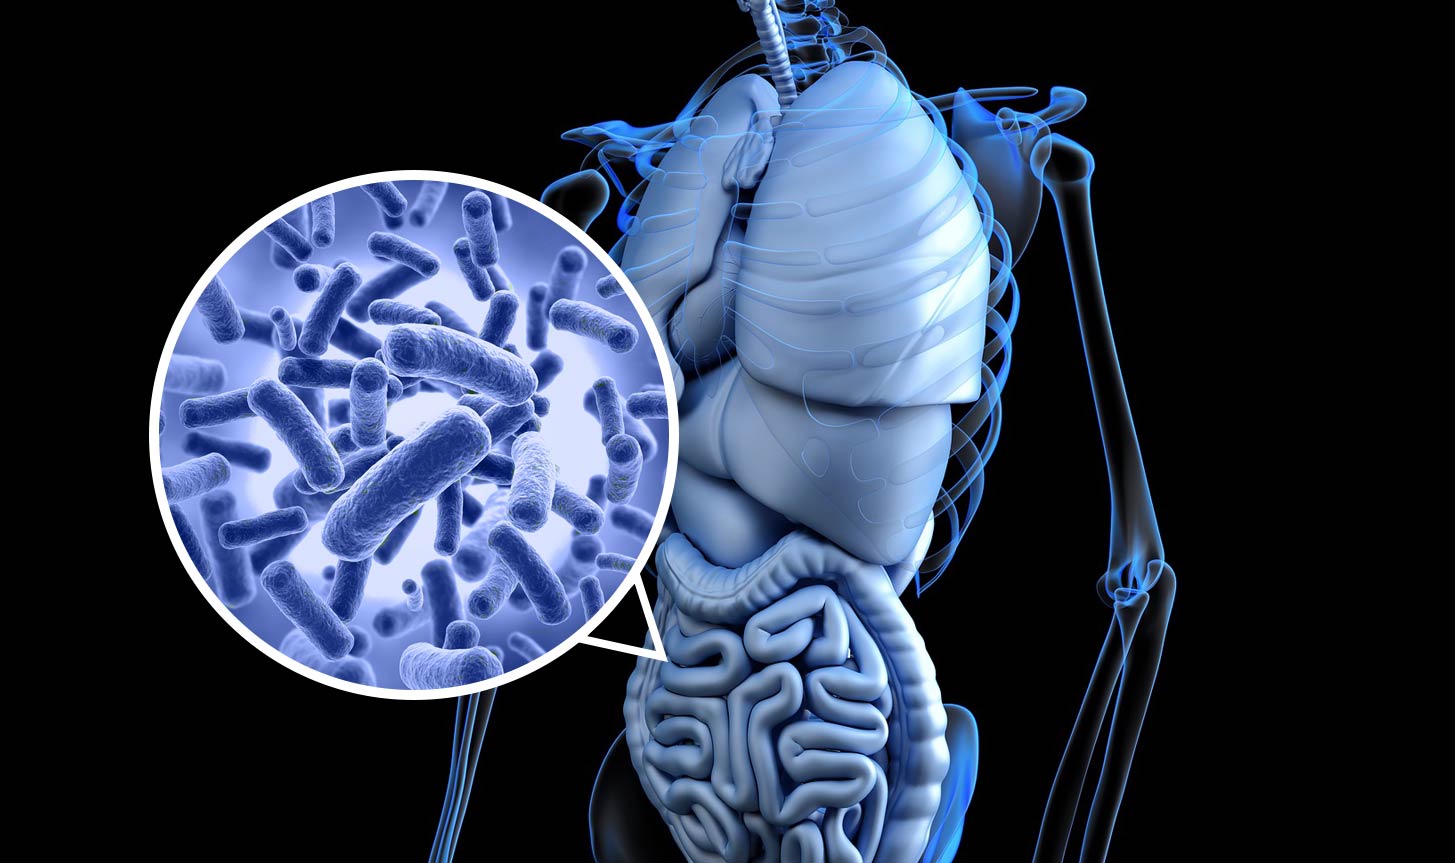 World Microbiome Day 2019 – In the Matter of Faecal Transplants for a Healthy Microbiome